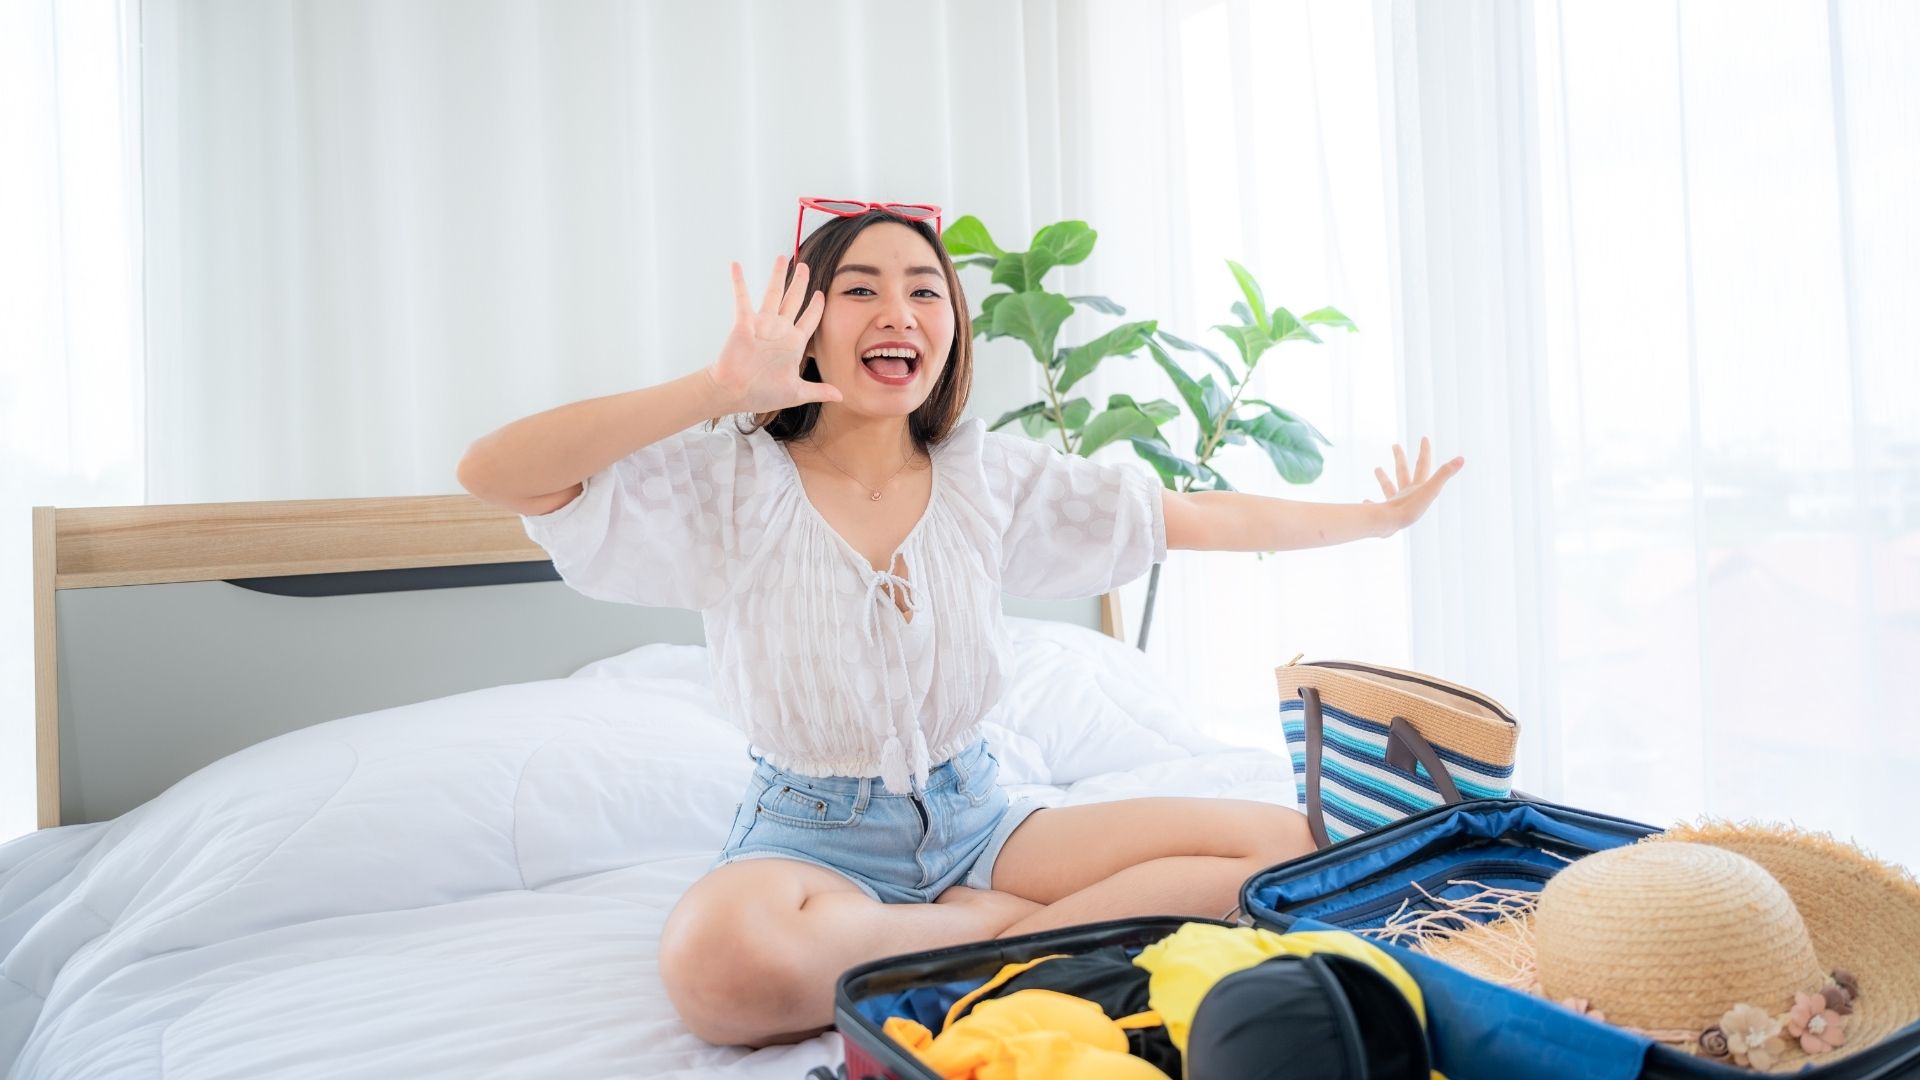 A female hotel guest smiling happily in her hotel bedroom, surrounded by her travel bags.